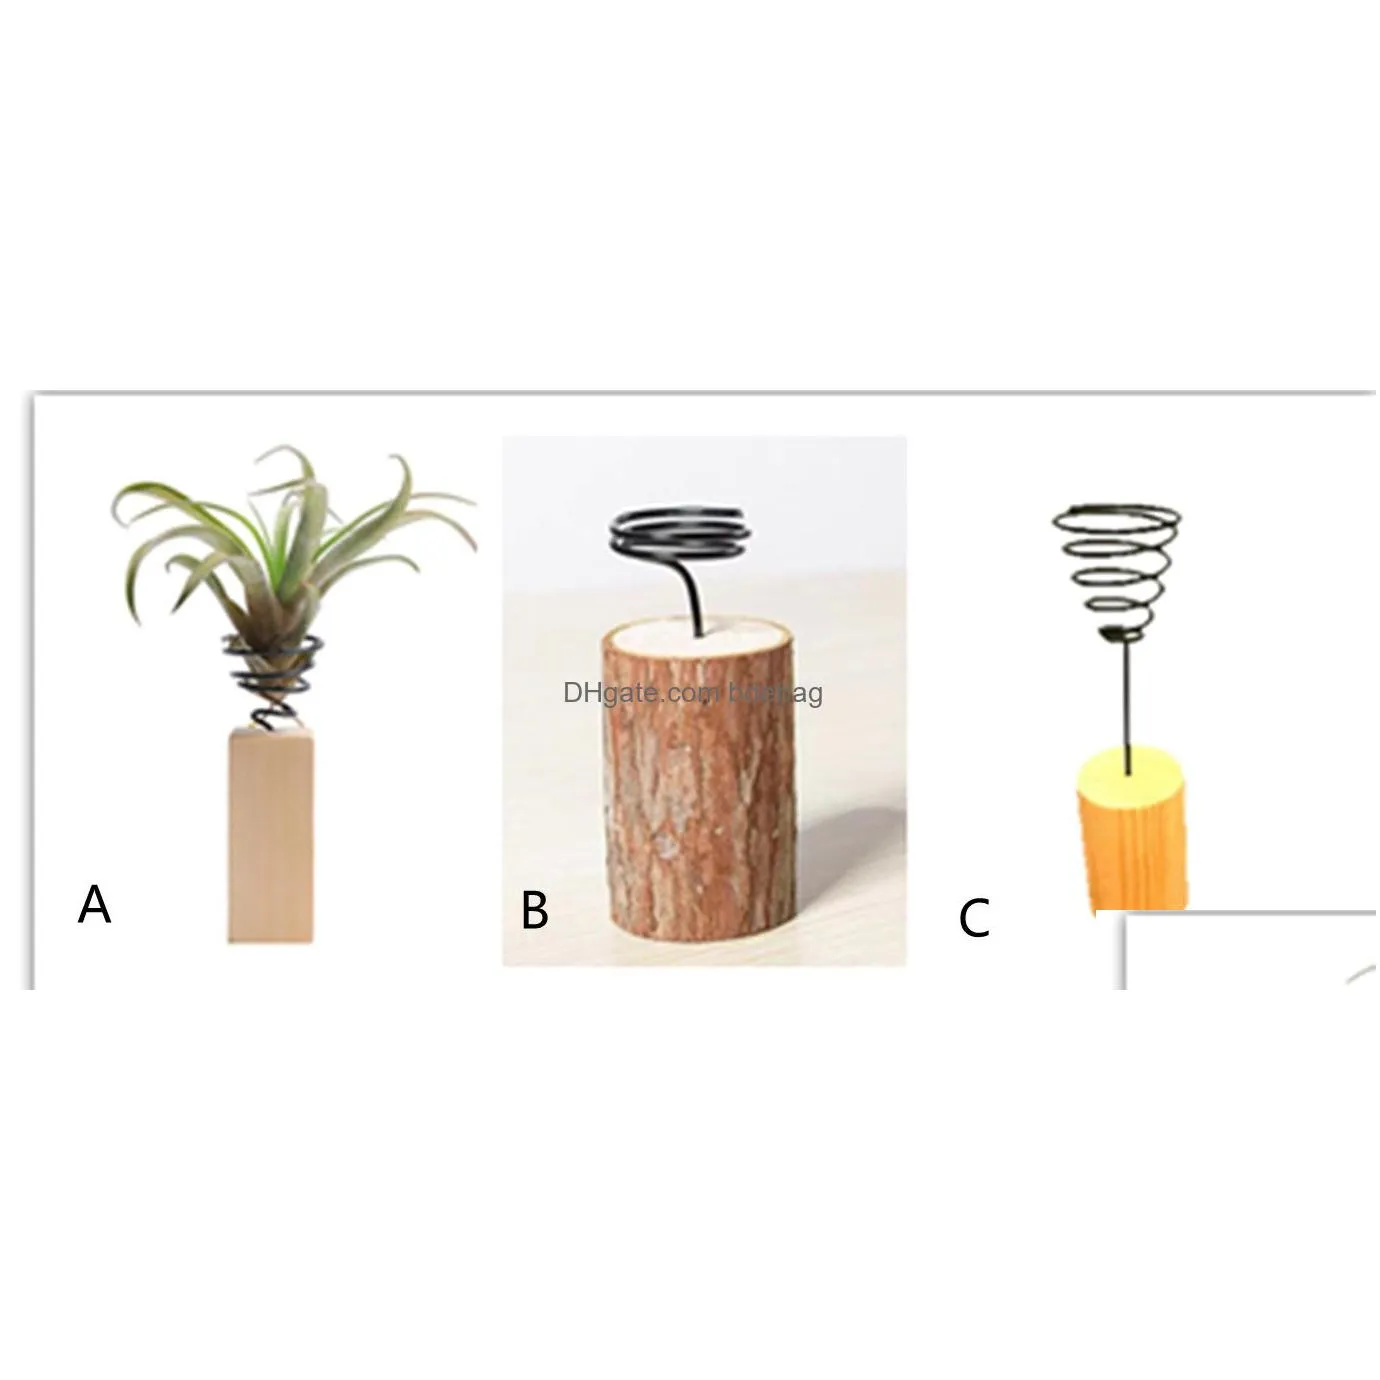 garden decorations iron air plant stand container tillandsia holder tabletop pot display rack vase with wooden base xb1